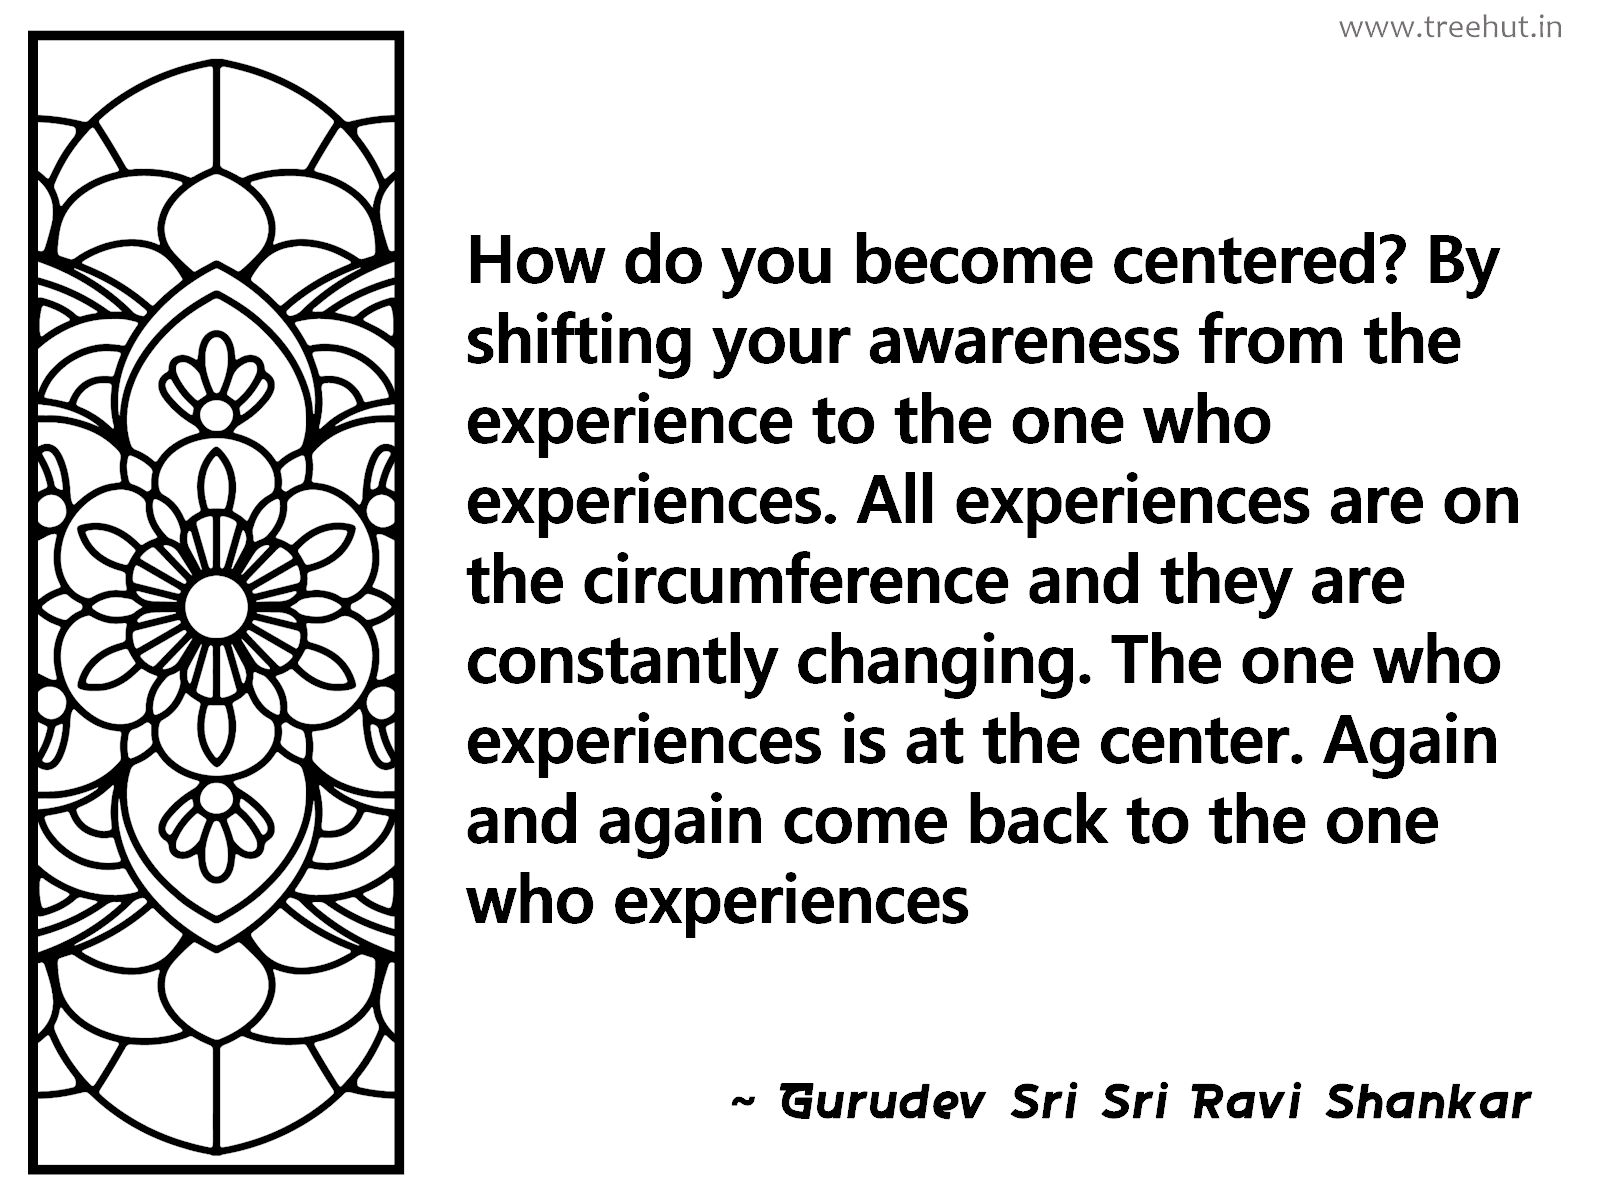 How do you become centered? By shifting your awareness from the experience to the one who experiences. All experiences are on the circumference and they are constantly changing. The one who experiences is at the center. Again and again come back to the one who experiences Inspirational Quote by Gurudev Sri Sri Ravi Shankar, coloring pages